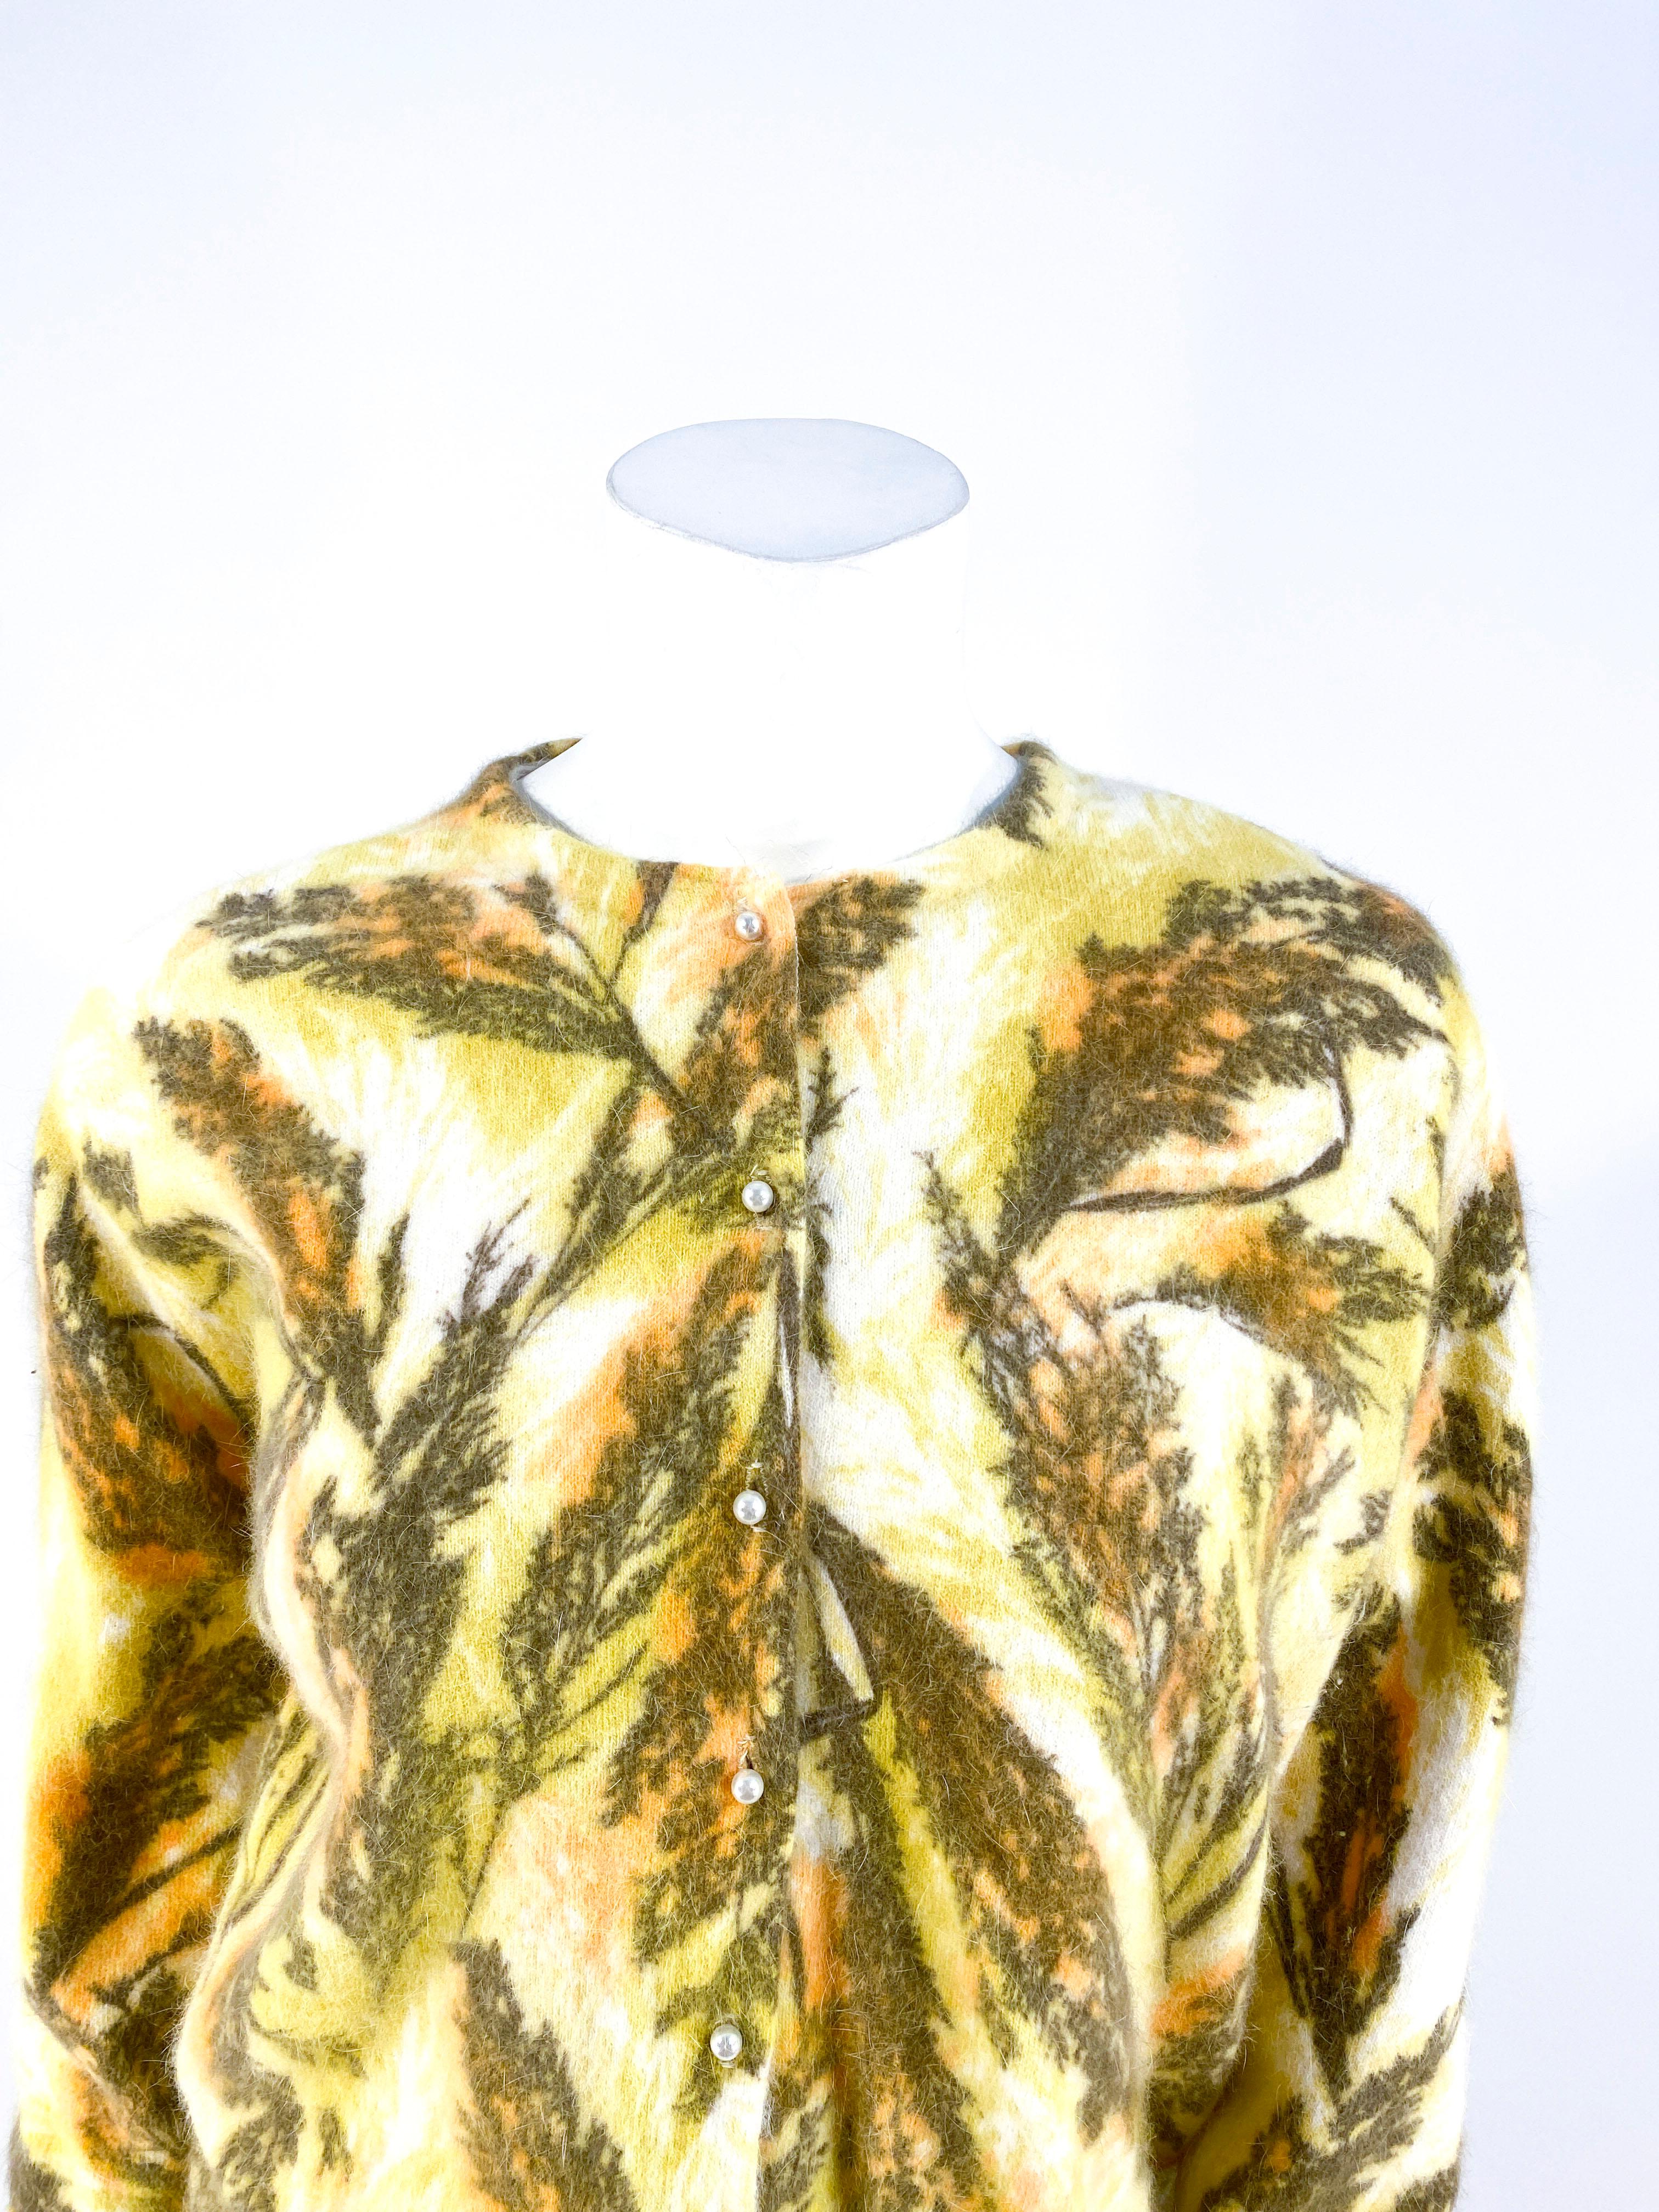 1950's Darlene printed angora/ lambswool printed cardigan featuring a foliage motif print in autumn tones of apricot, gold, cream, and olive. The face has a button down pearl closure that ends at the ribbed hem. The knit angora/lambswool is very